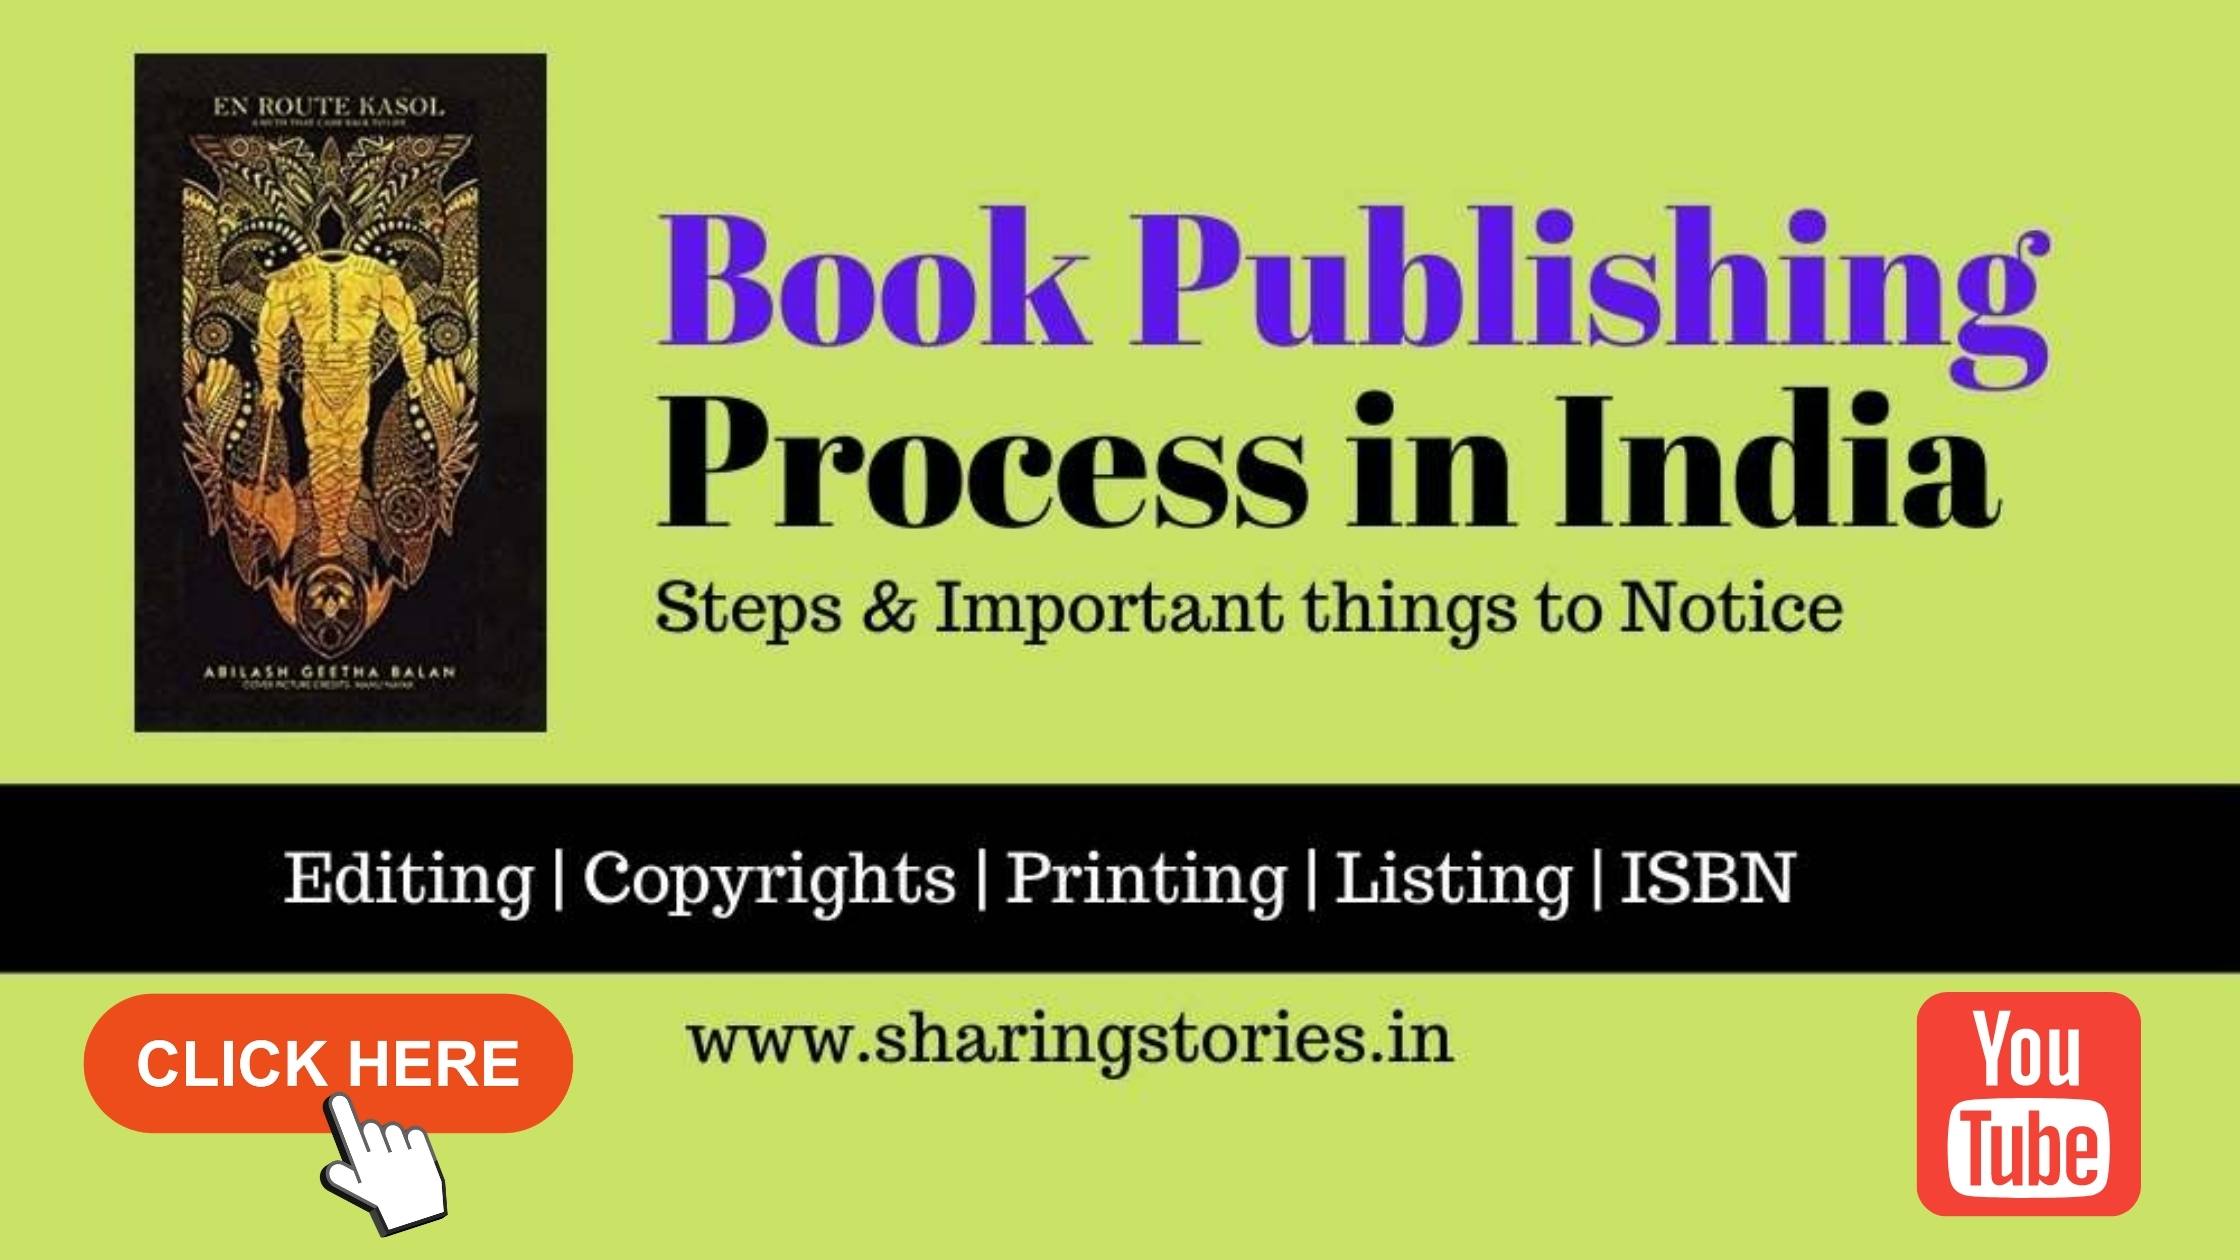 Book Publishing Process in India